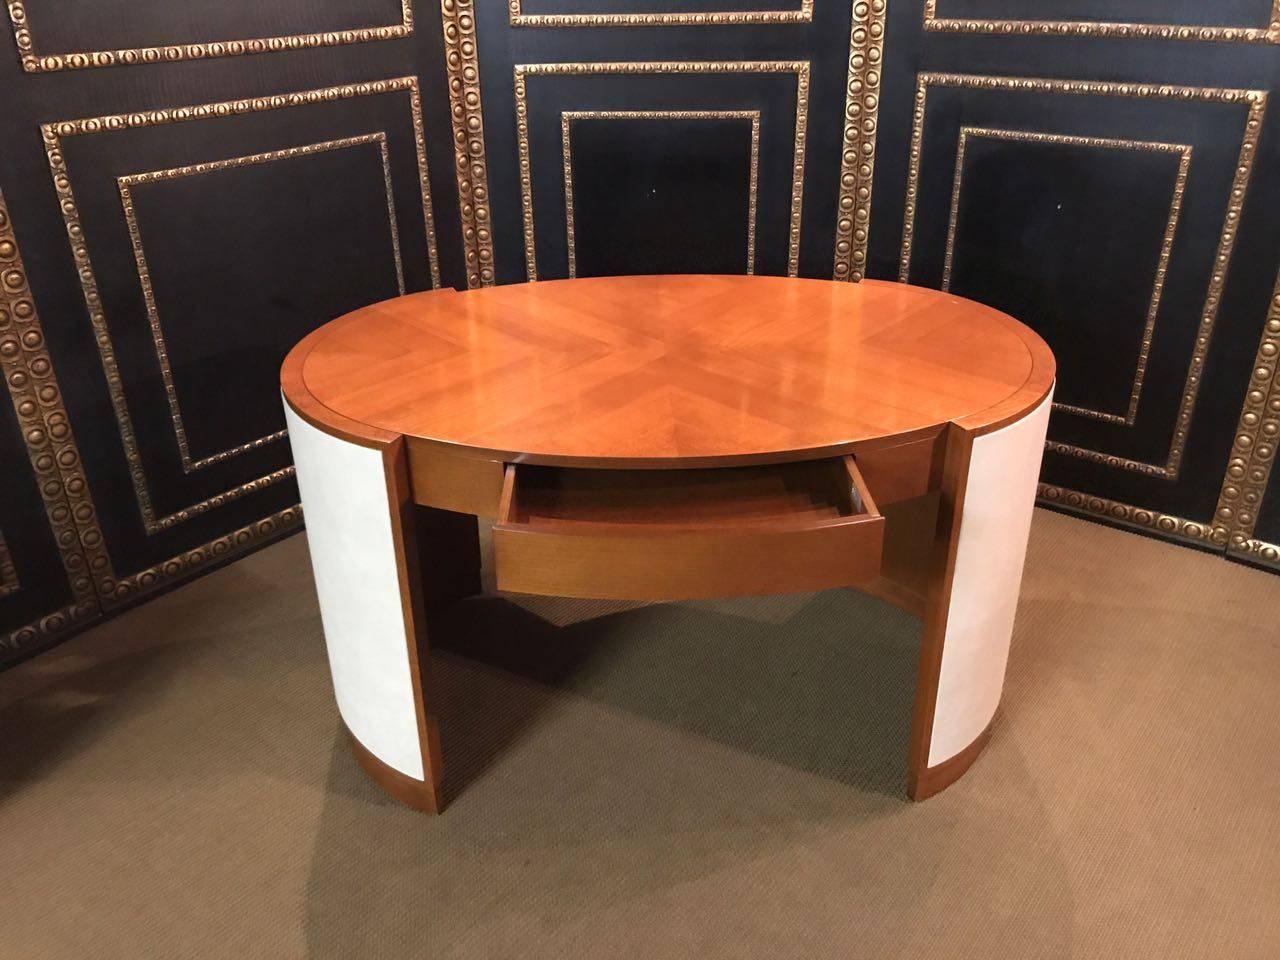 Italian Rare Italy Oval Desk with Leather in Art Deco Style - Selva